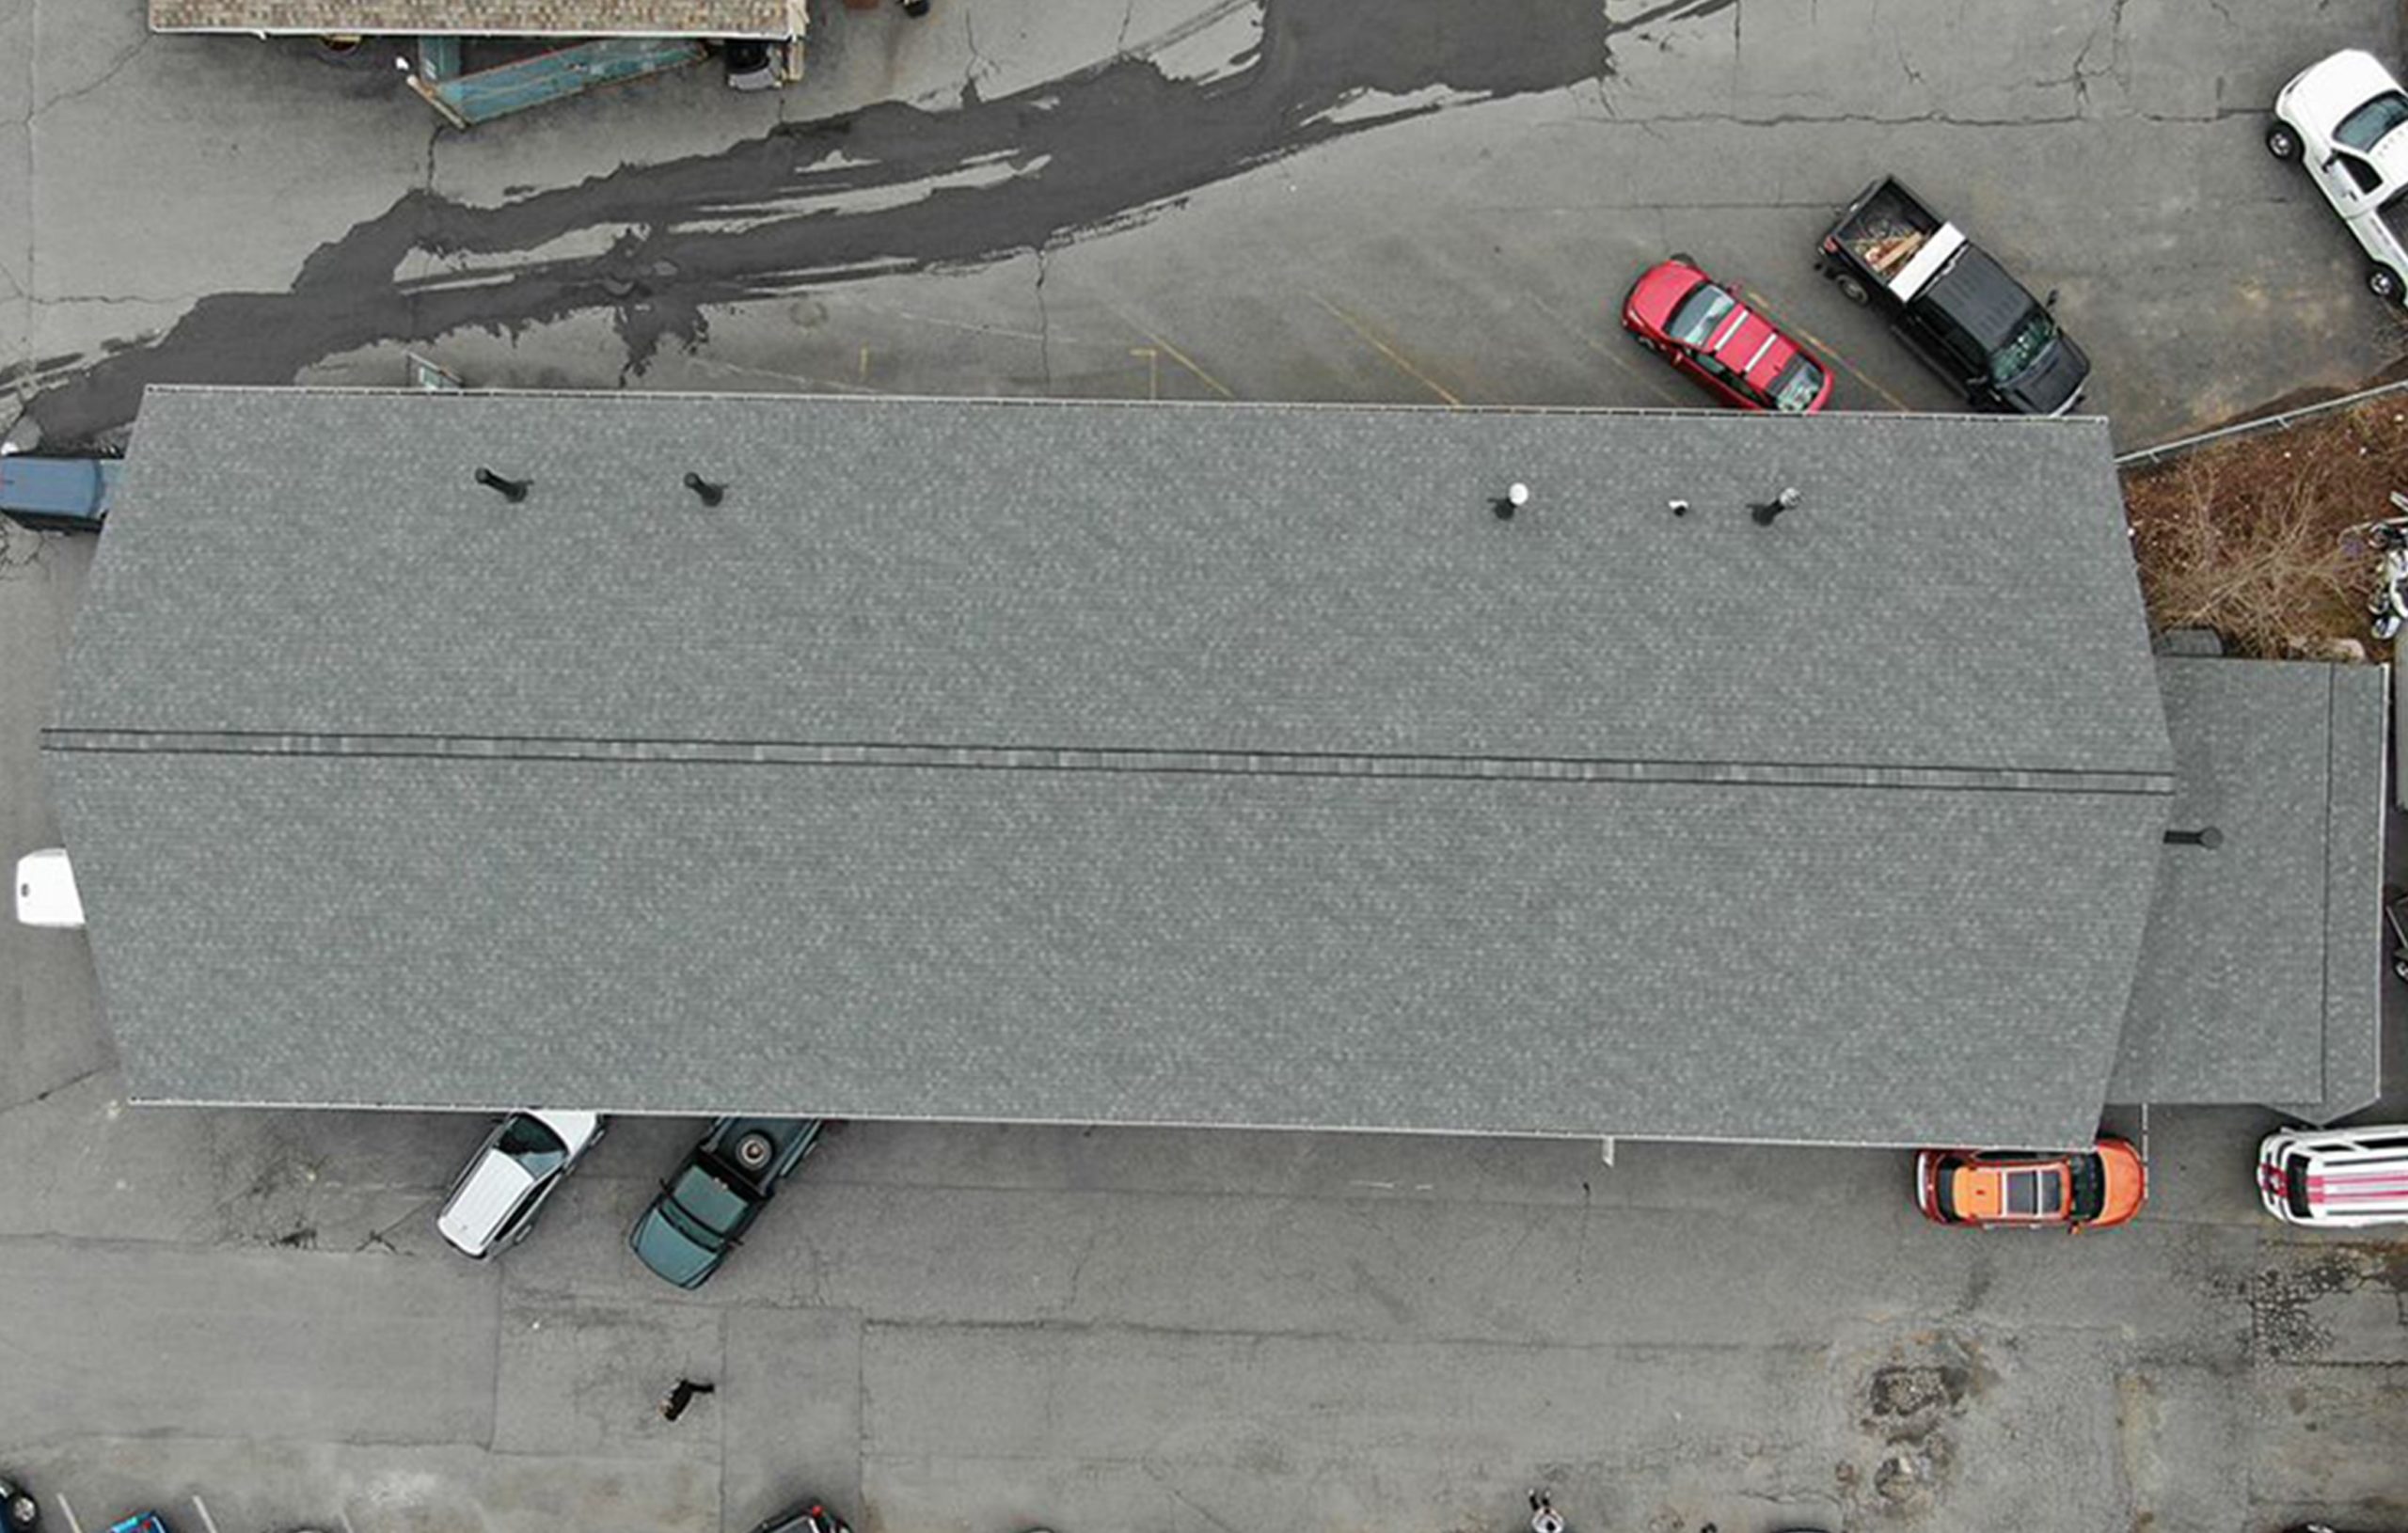 Overview of a black tile roof for a commercial building